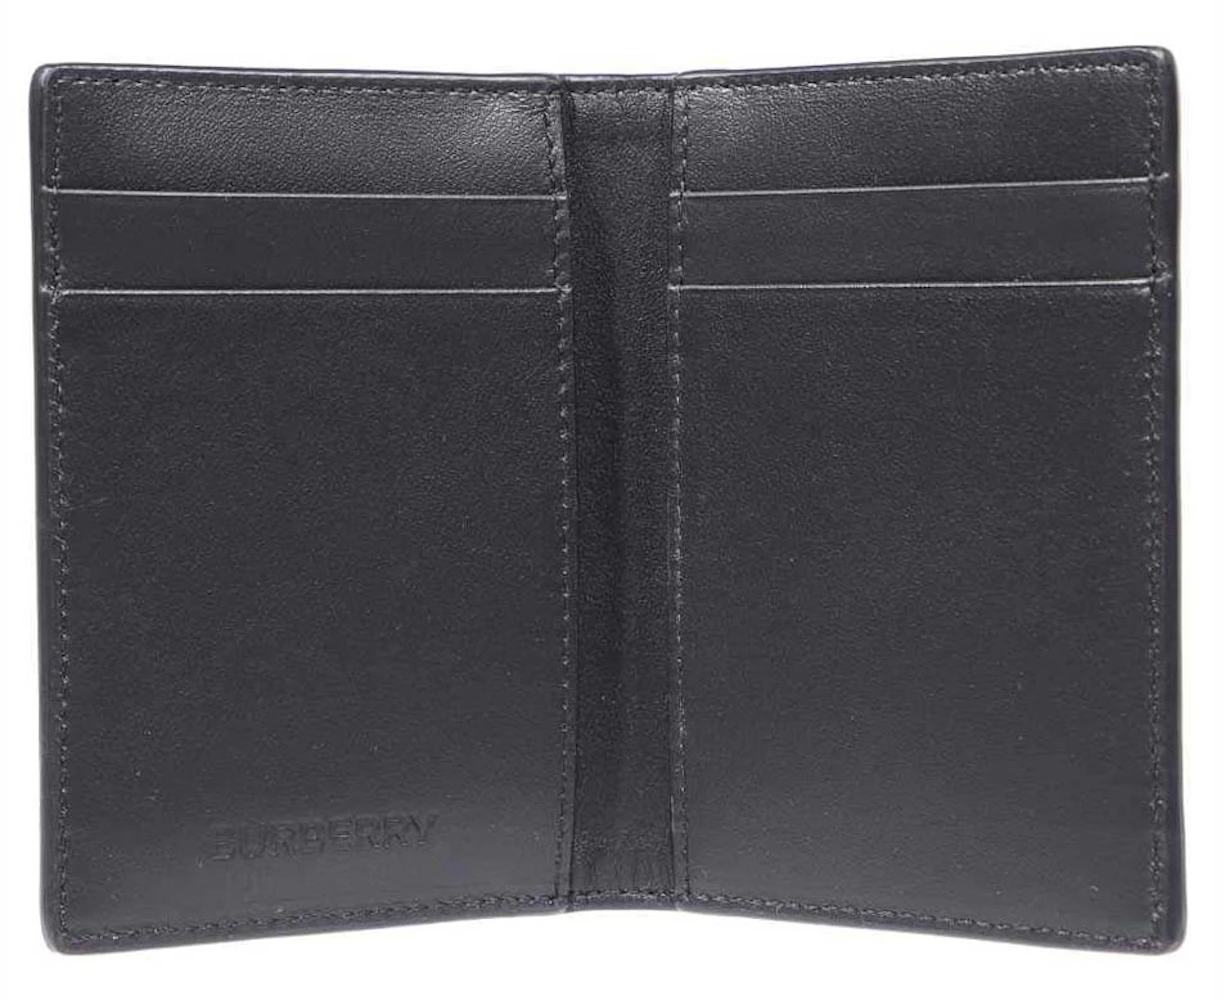 Burberry TB Monogram Bifold Card Holder Navy in Leather - US